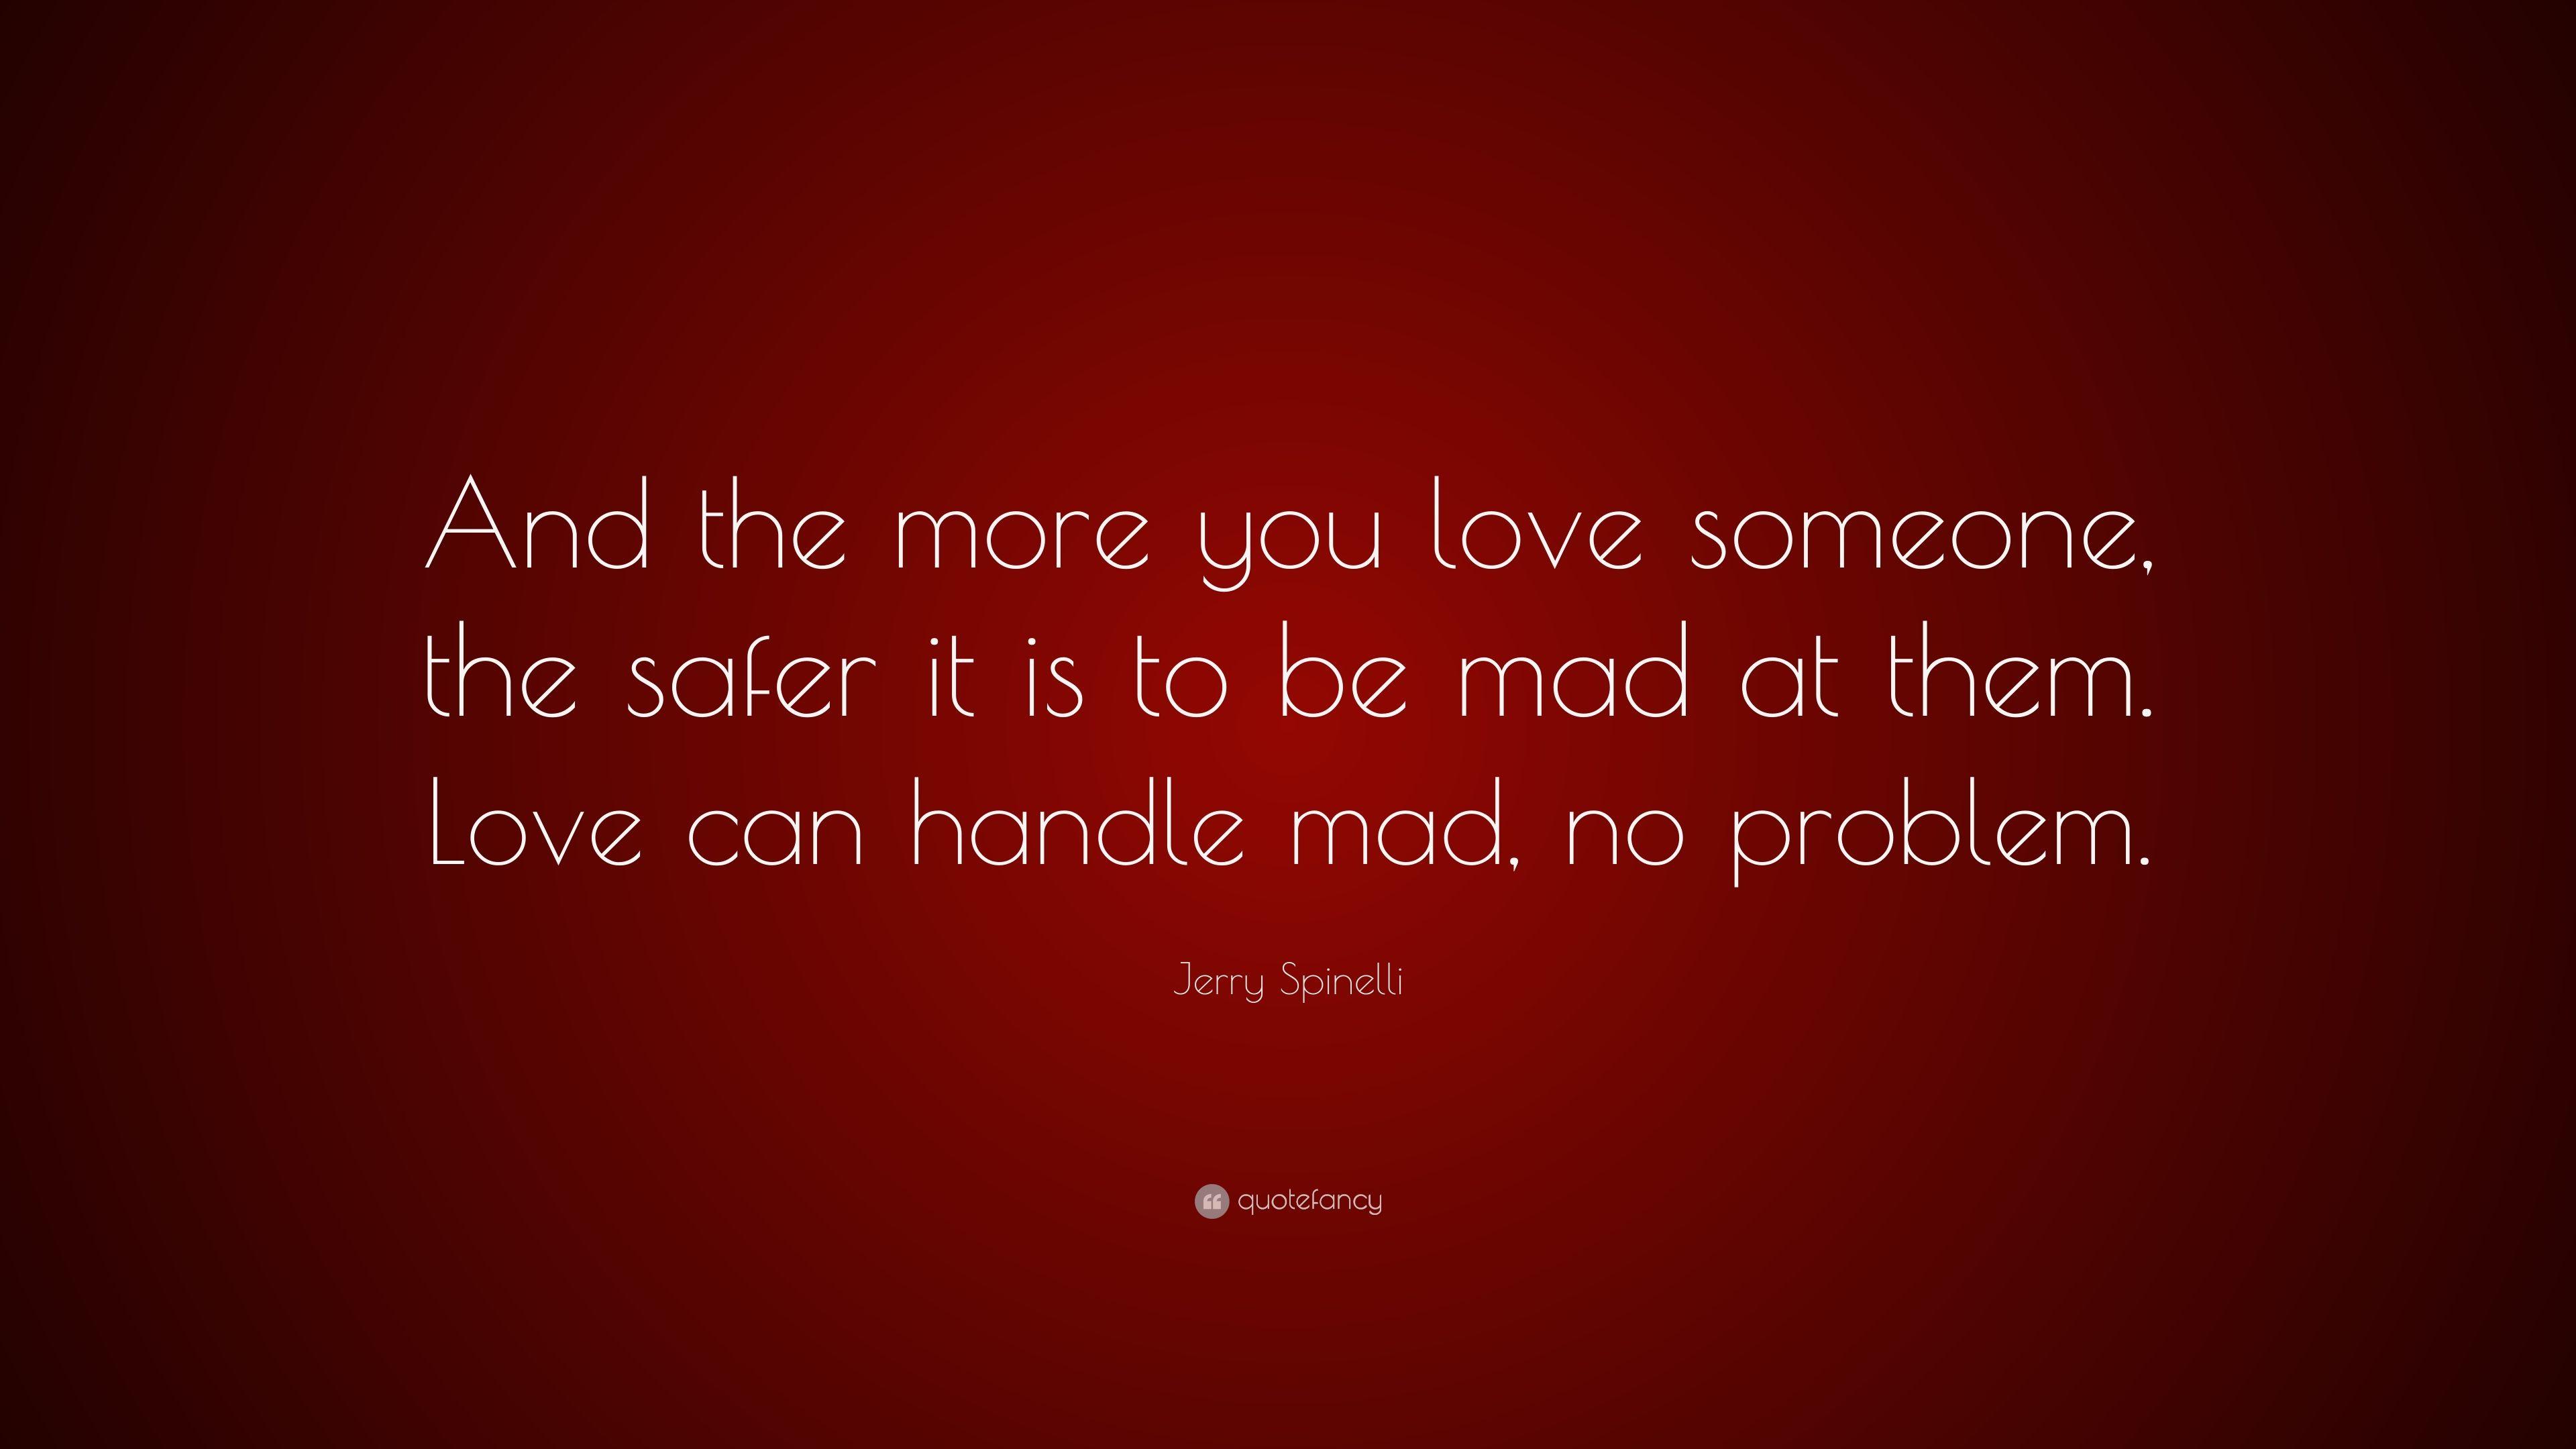 Jerry Spinelli Quote: “And the more you love someone, the safer it